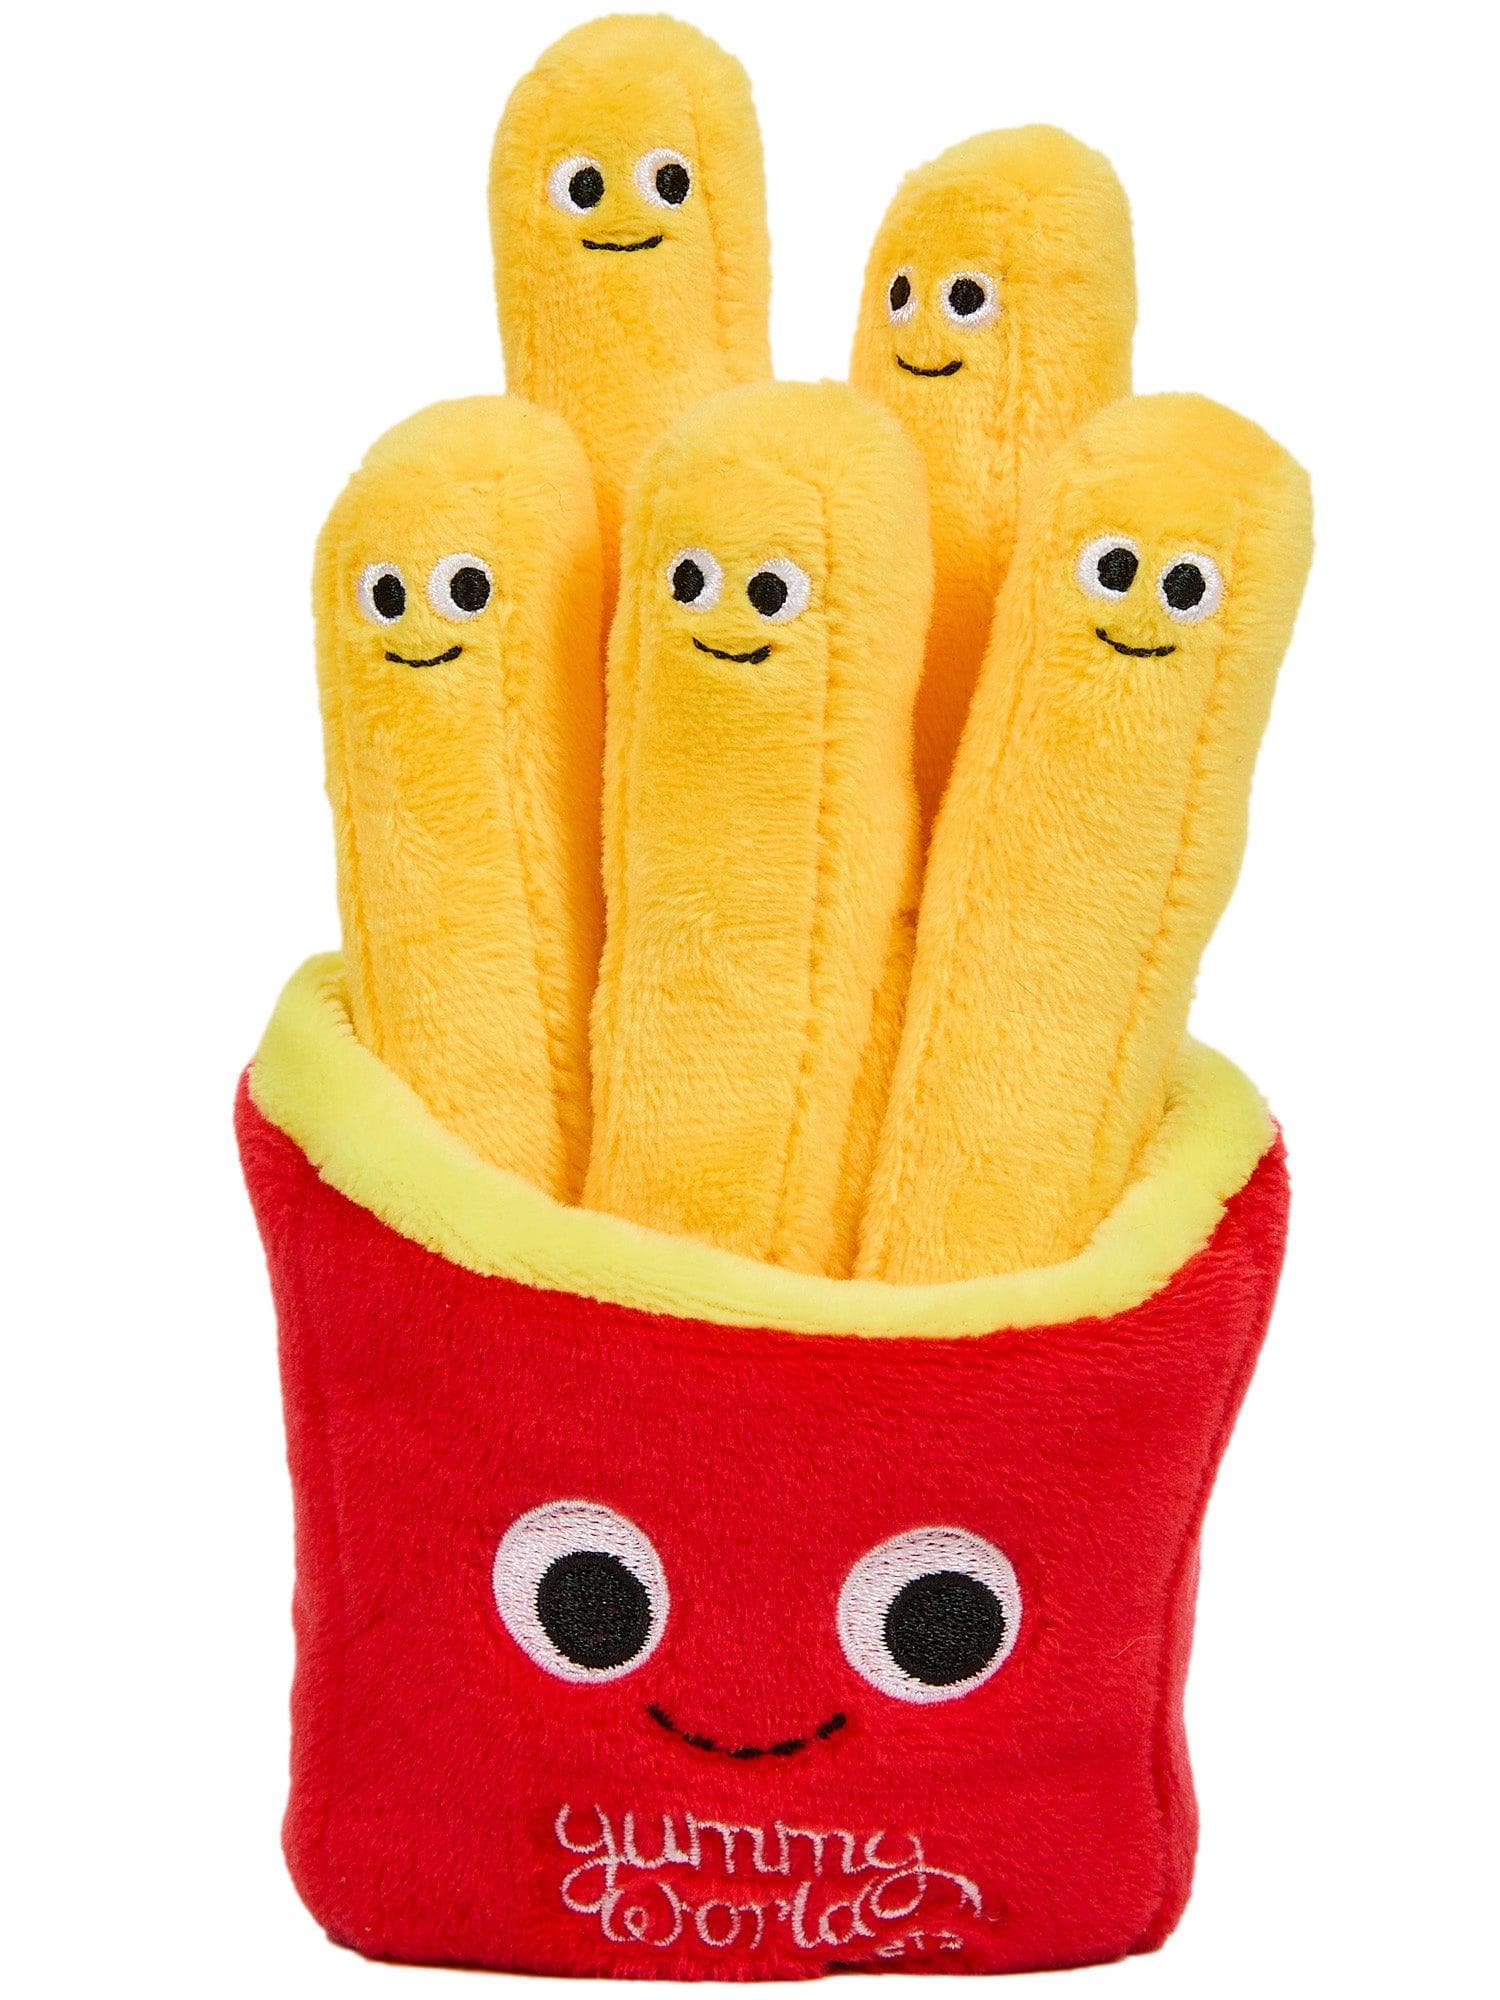 Yummy World French Fry Pet Toy by Kidrobot - costumes.com